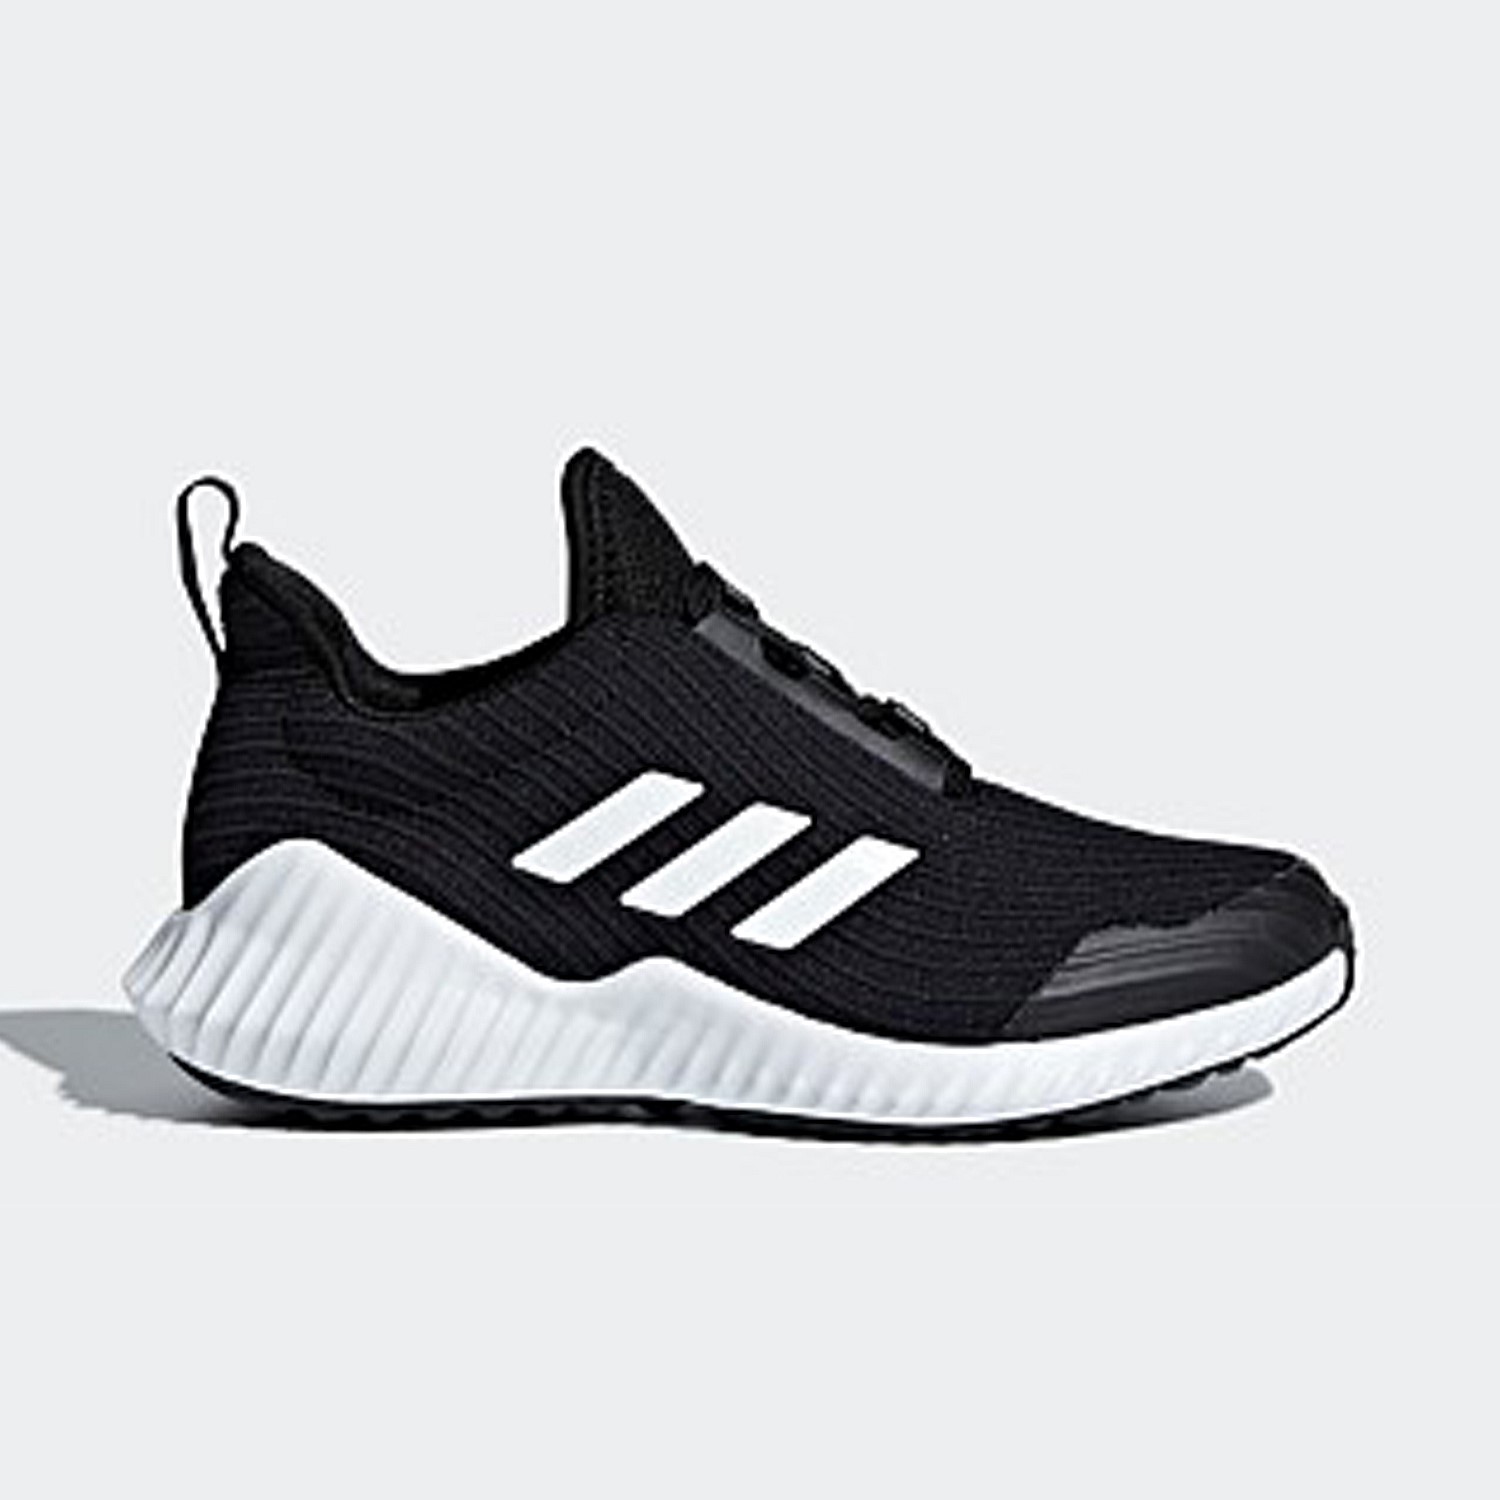 stirling sports adidas shoes